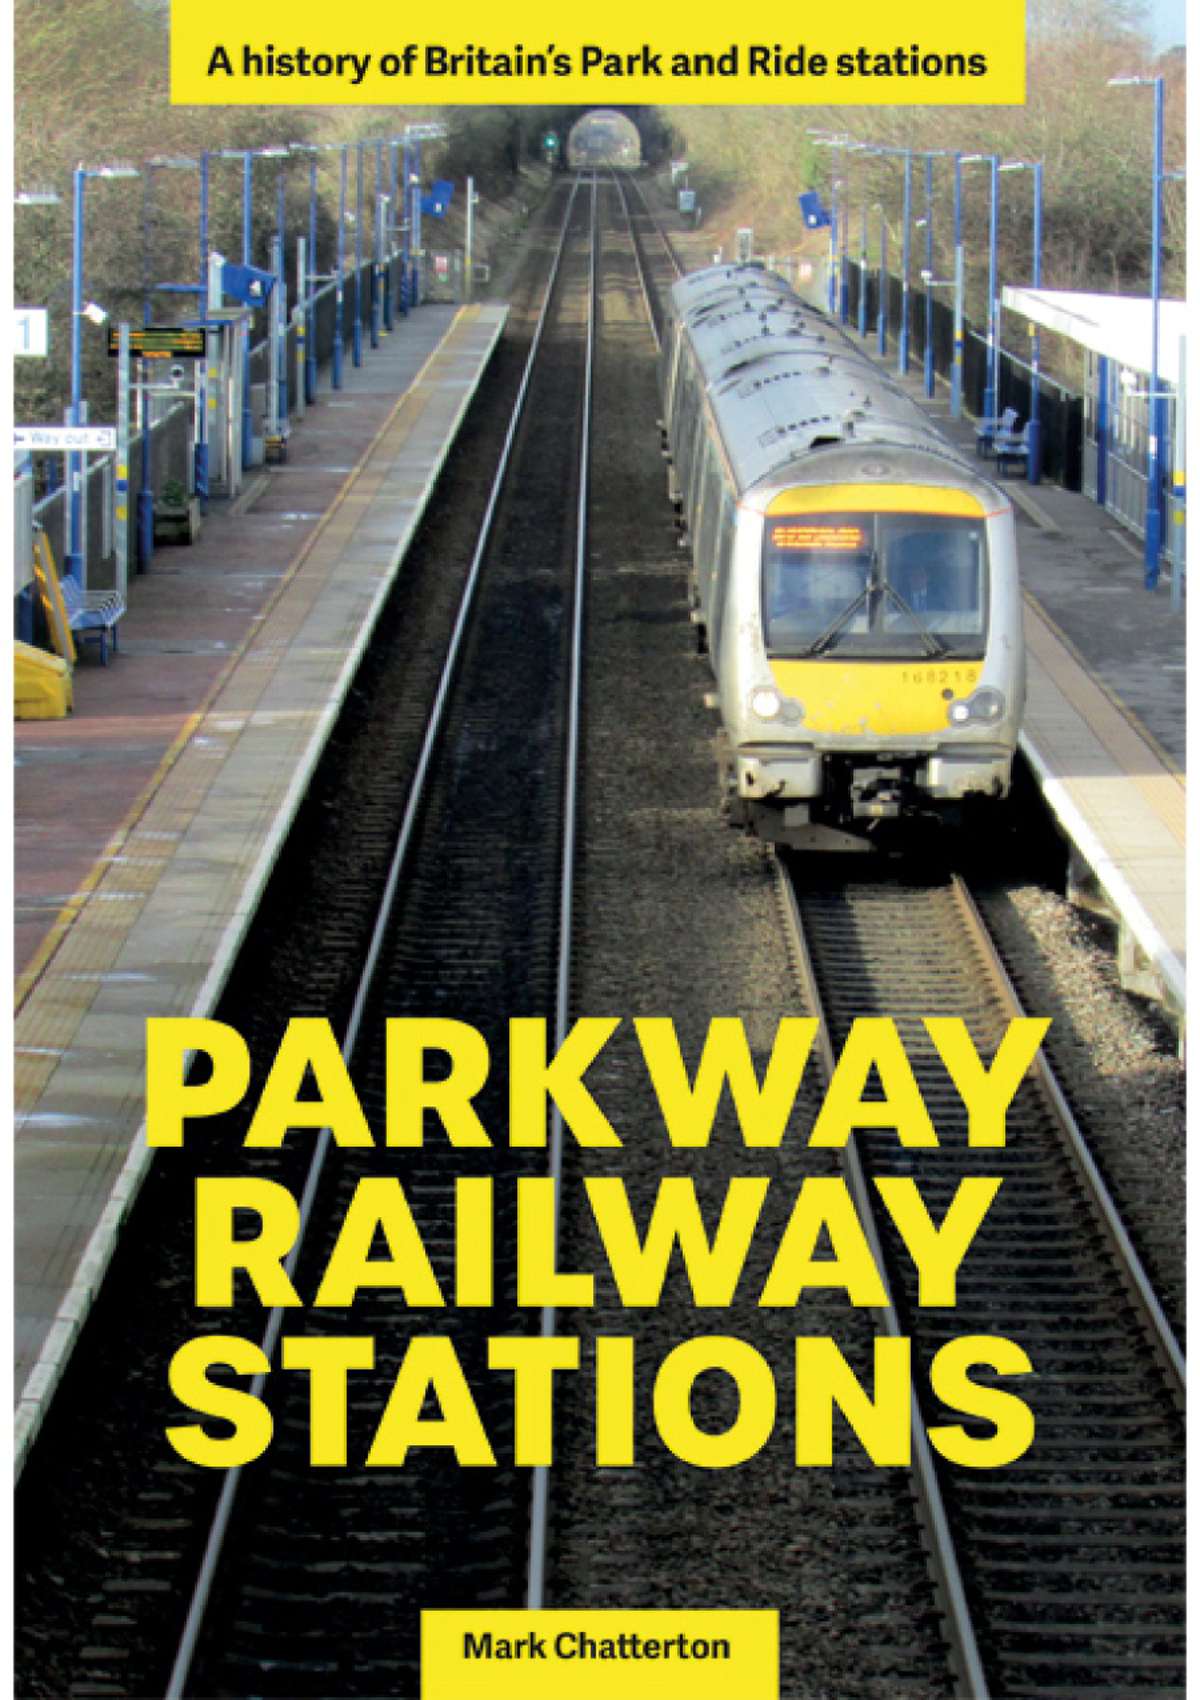 8443 - Parkway Railway Stations